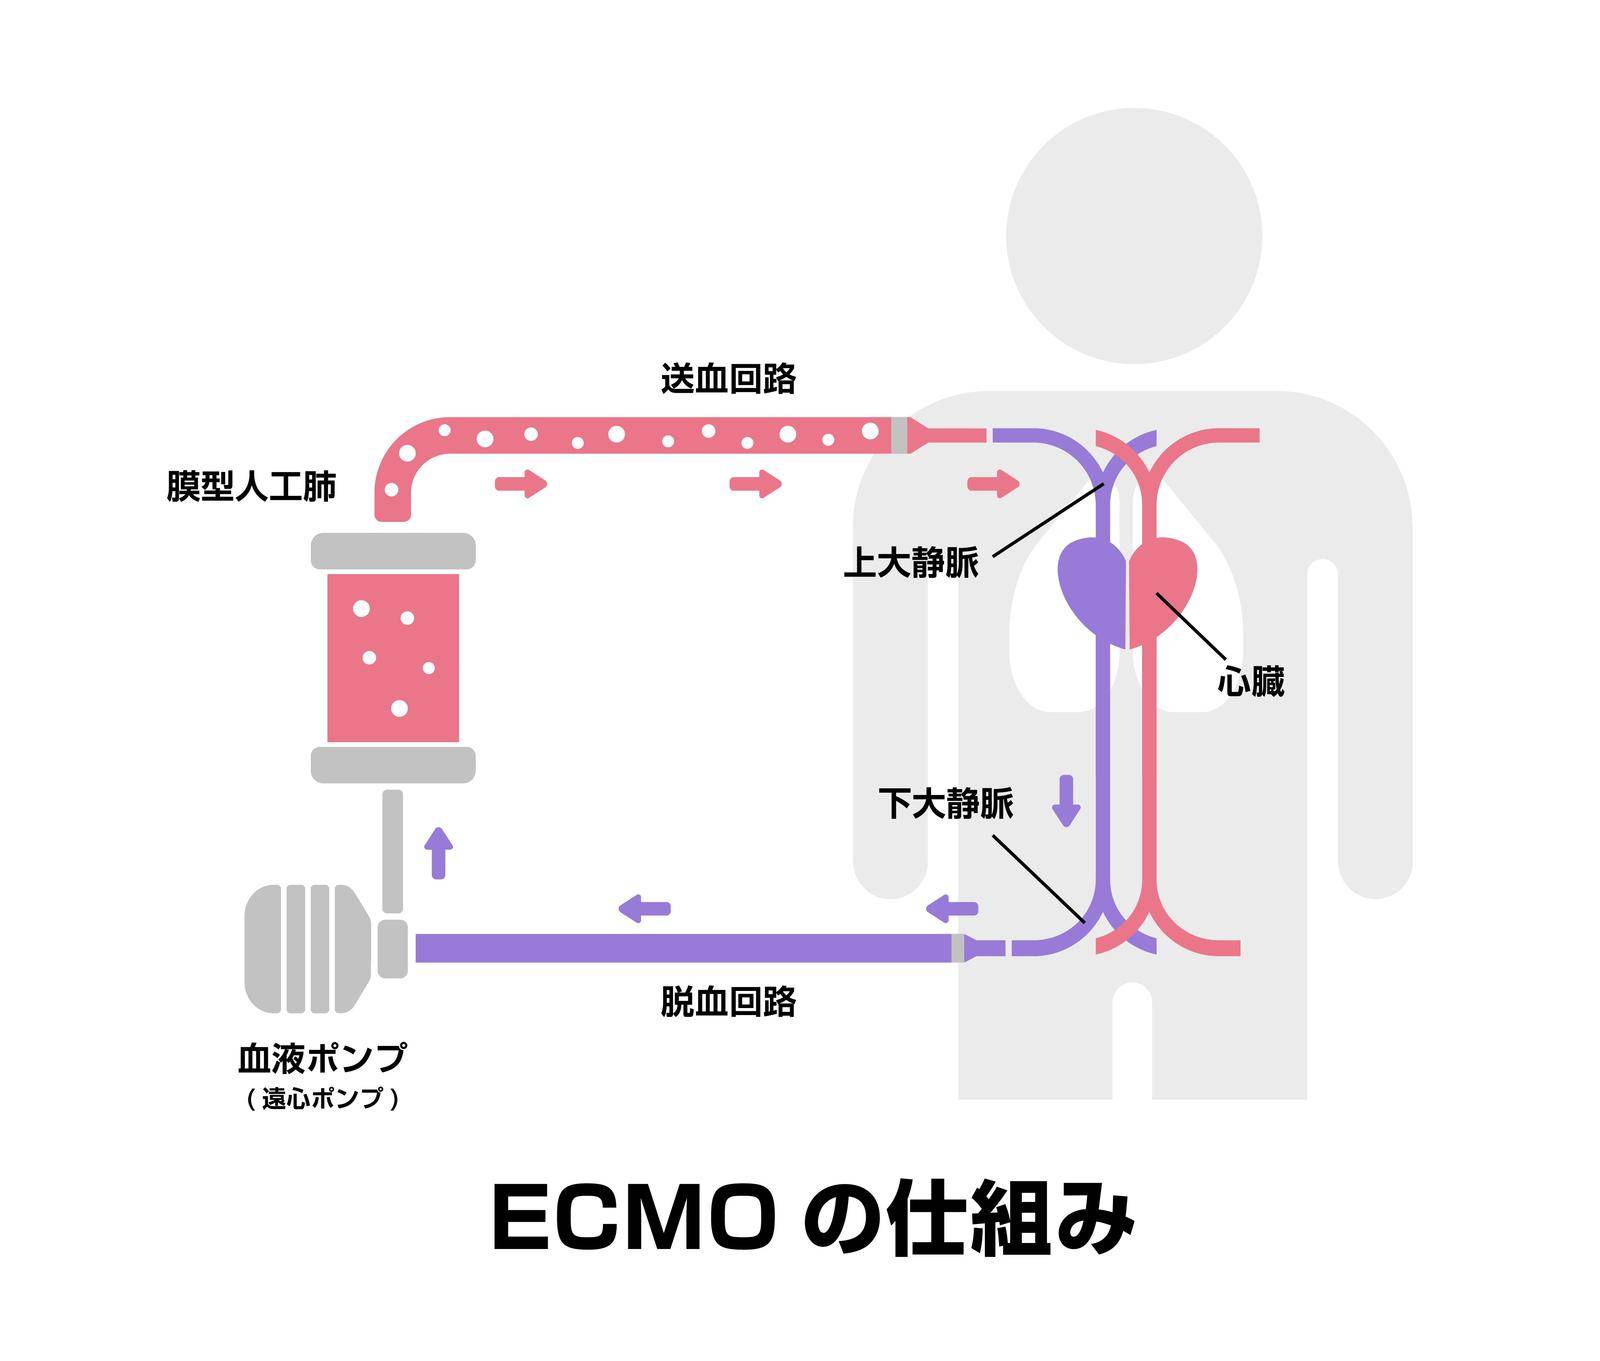 ECMO ( Extracorporeal membrane oxygenation ) structure vector illustration / Japanese by barks